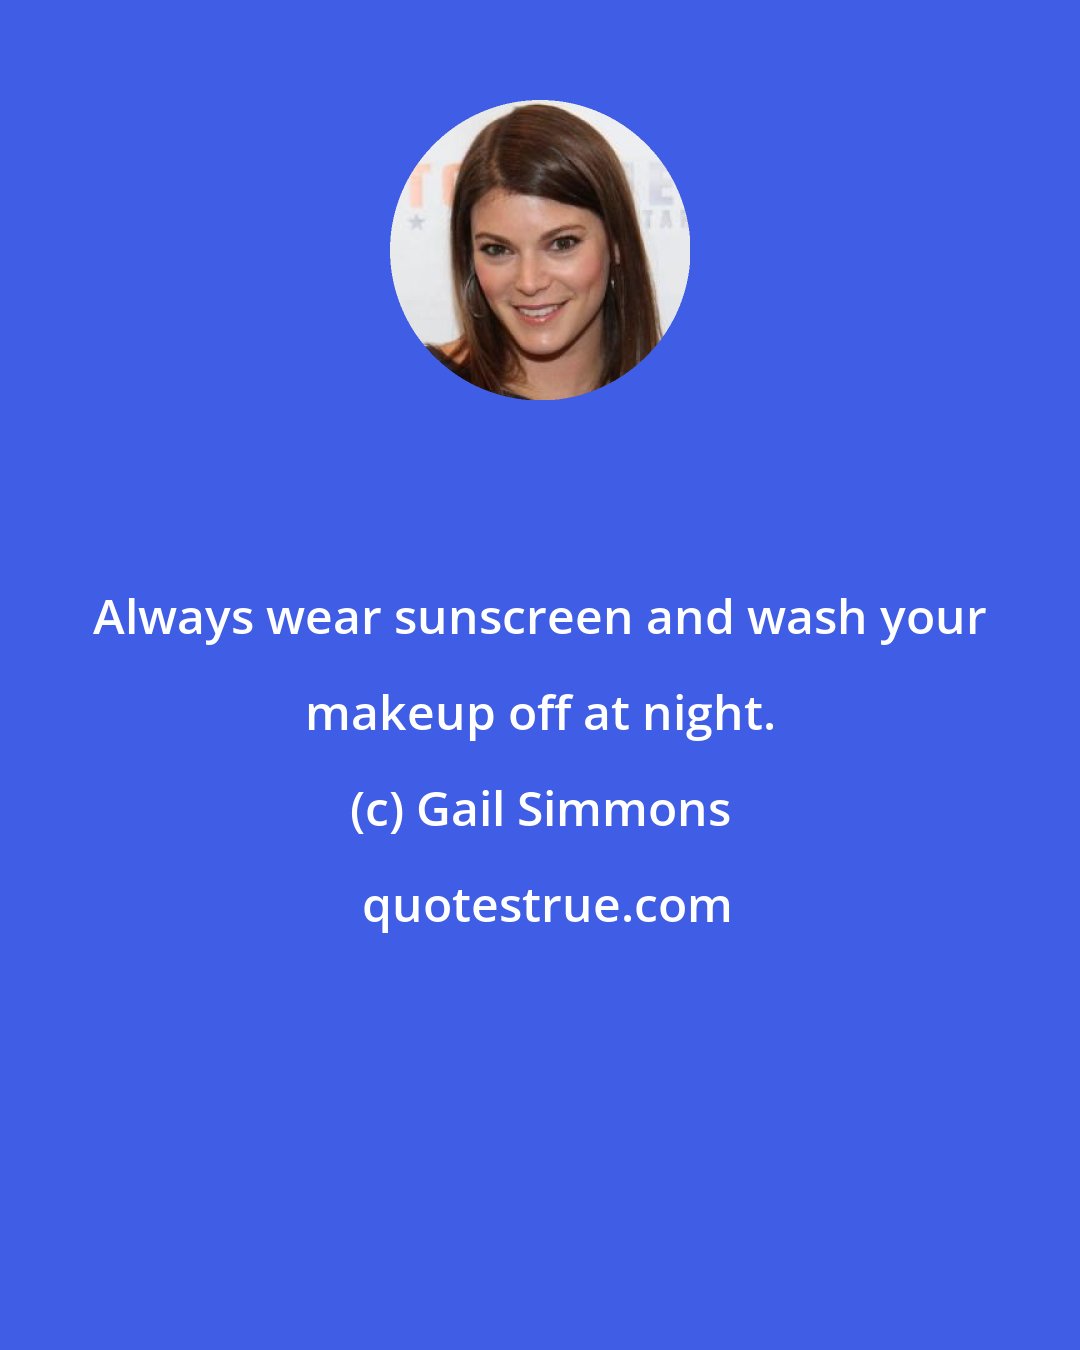 Gail Simmons: Always wear sunscreen and wash your makeup off at night.